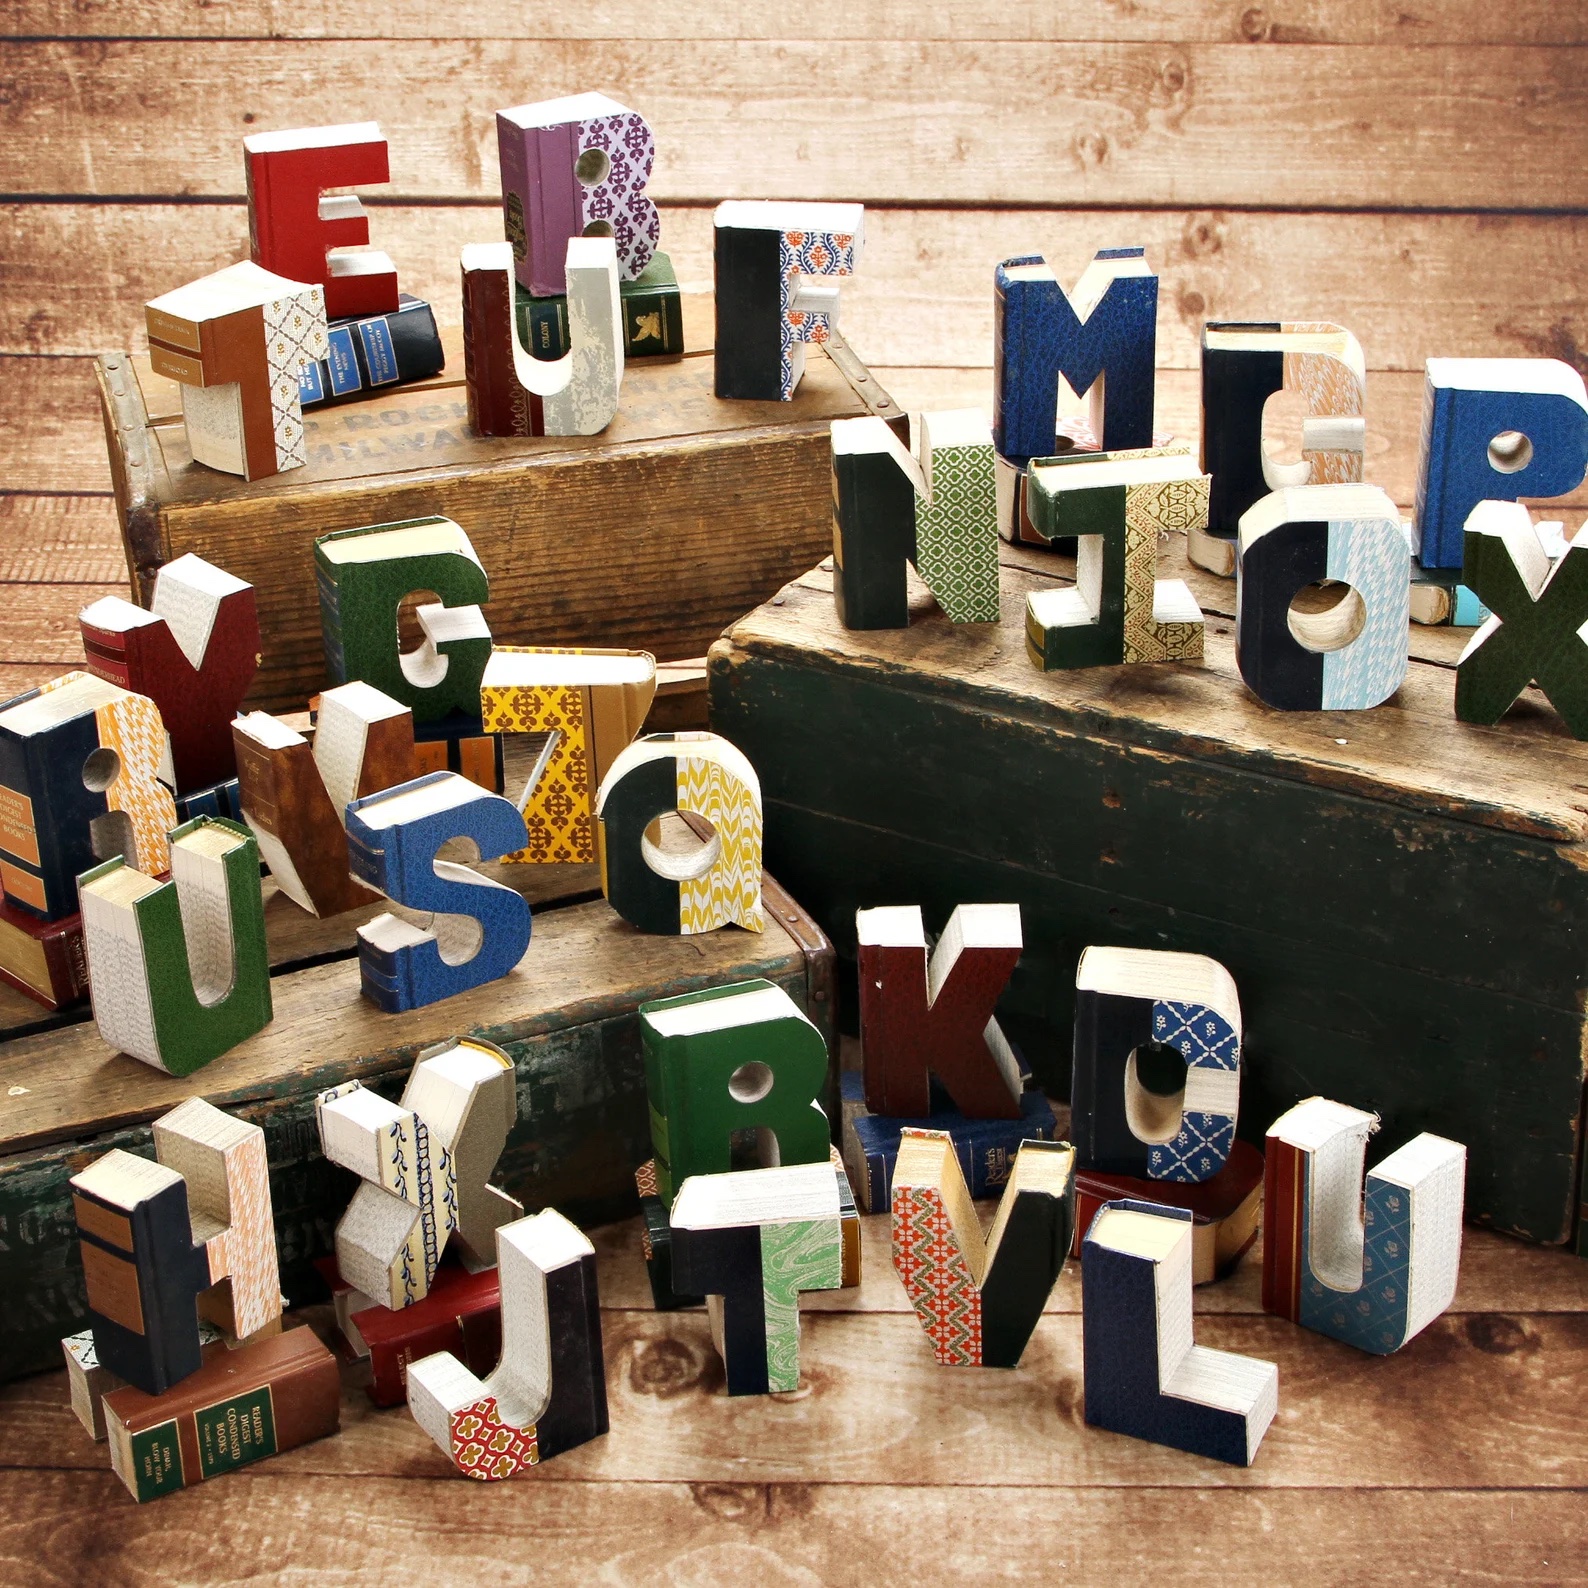 A photo of different letters cut out of books